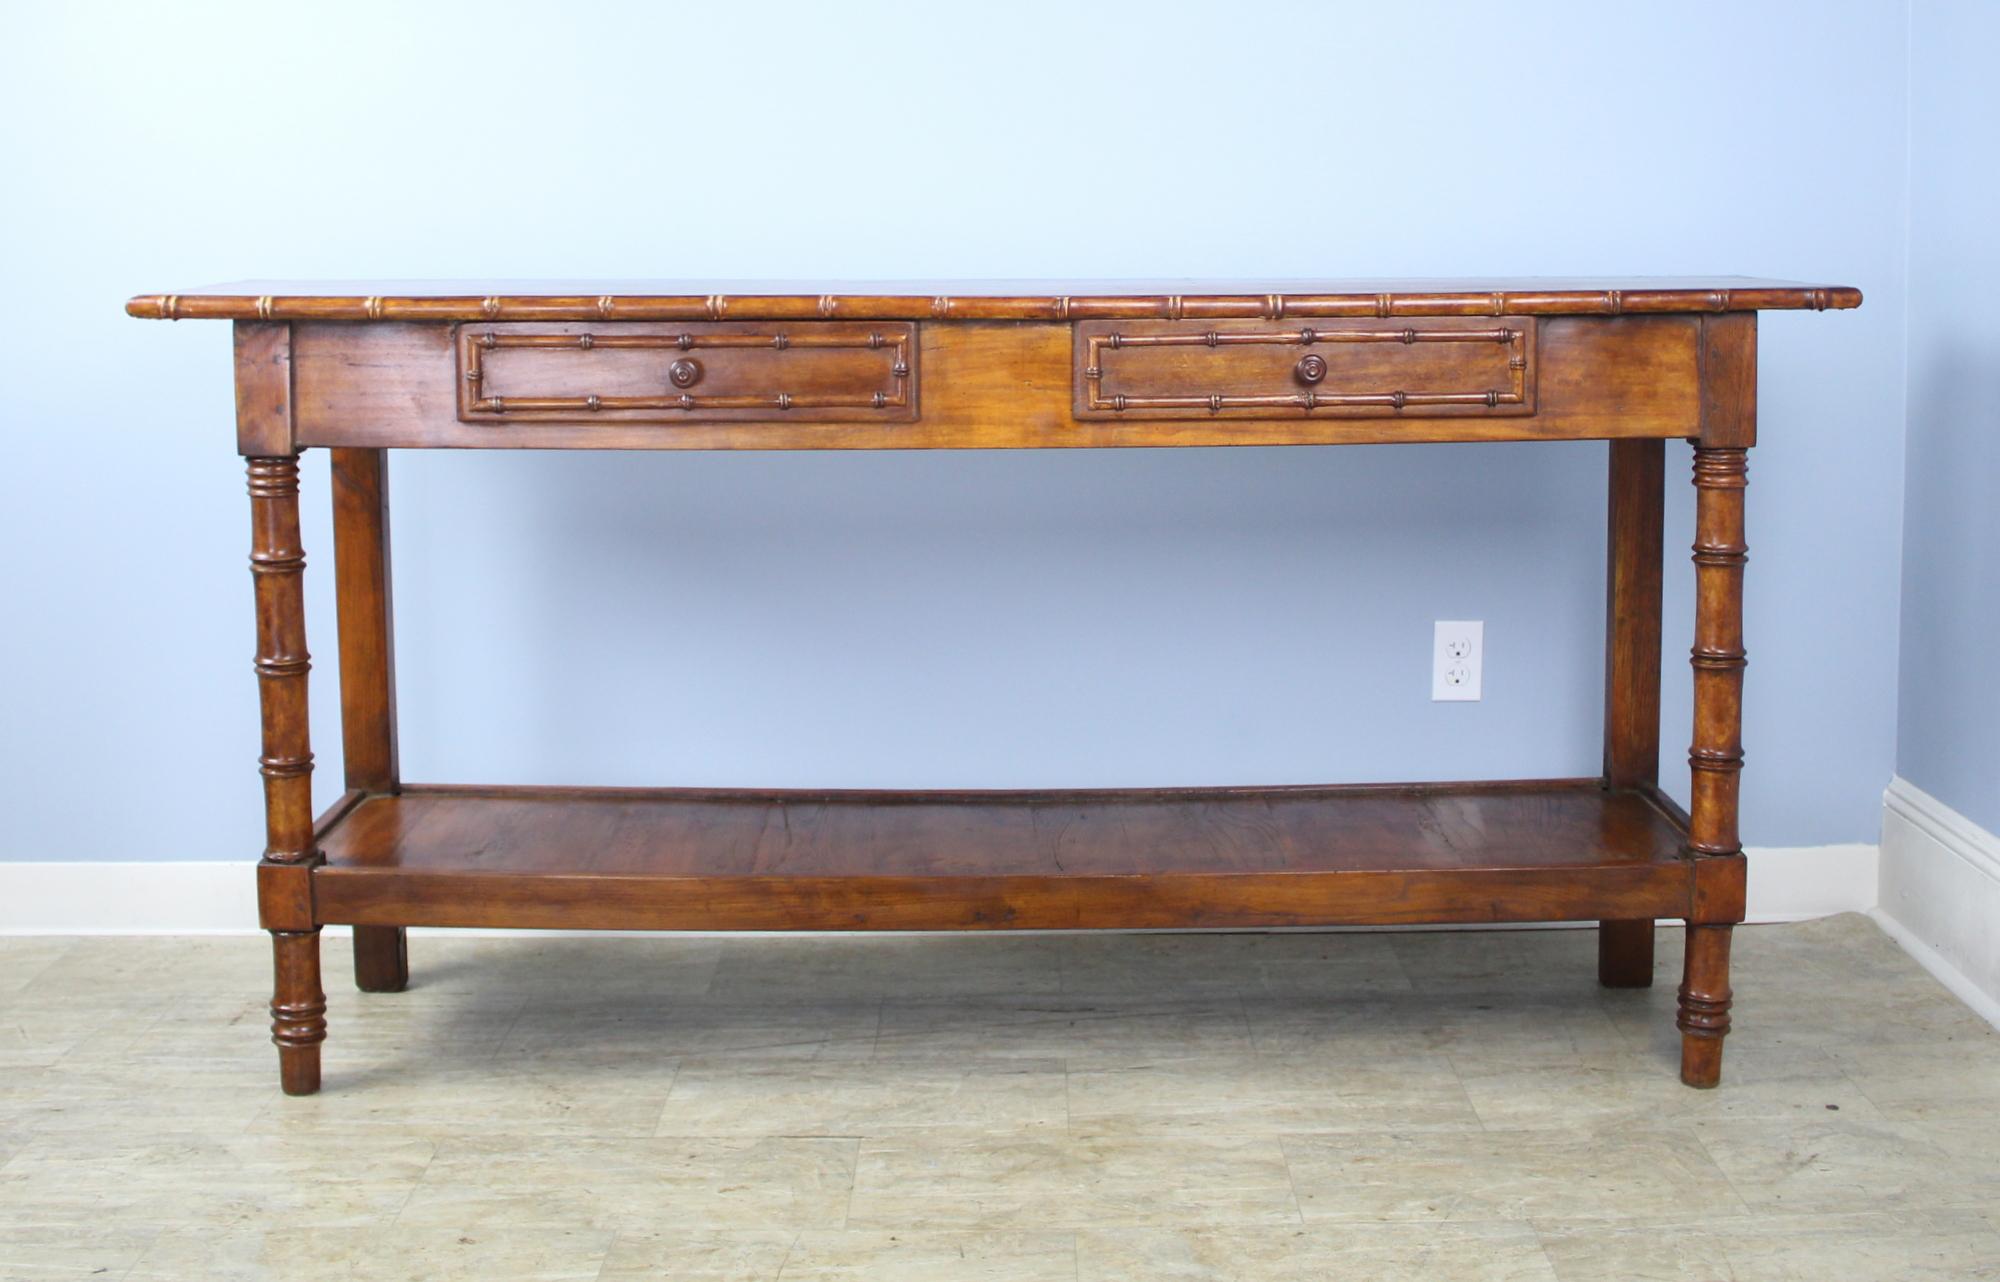 A lovely fruitwood and pine faux bamboo potboard server, custom-made for Briggs House in France with old legs, circa 1880. Generously proportioned with a thick top, two roomy drawers embellished with bamboo detail, and deep rich cherry color.